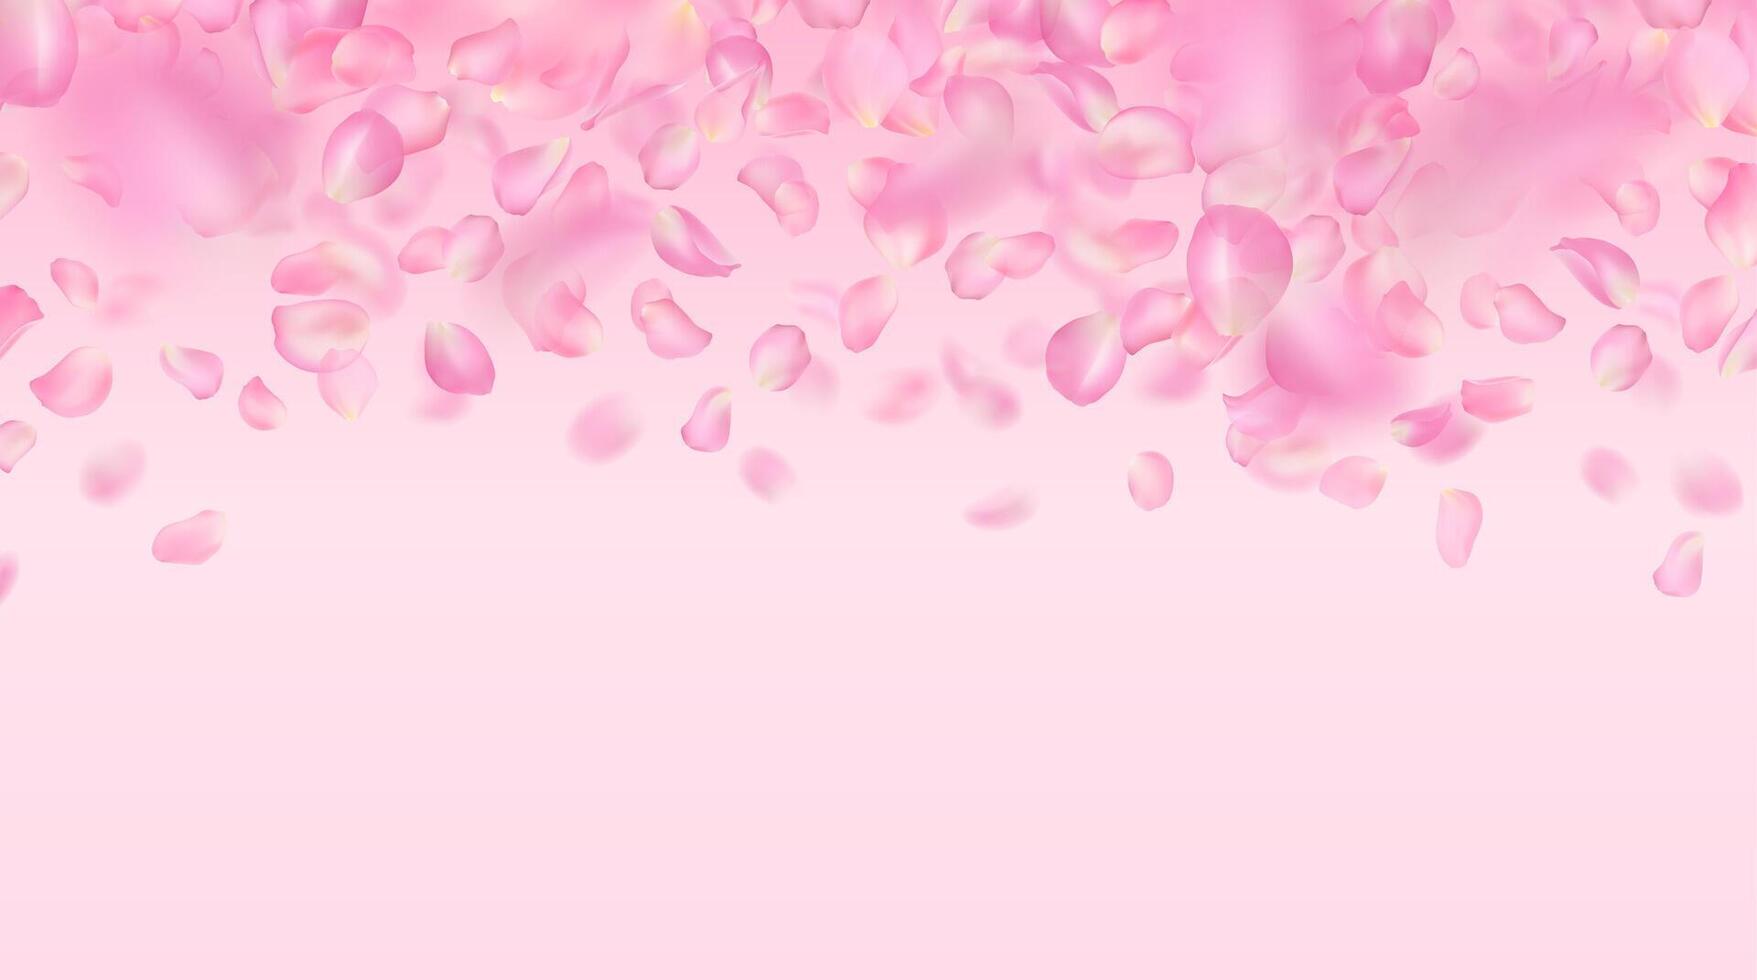 Vector background of realistic falling pink rose petals. Template of flying voluminous blurred sakura petals with blur effect. Spring floral illustration for wallpaper, banner, romantic greeting card.